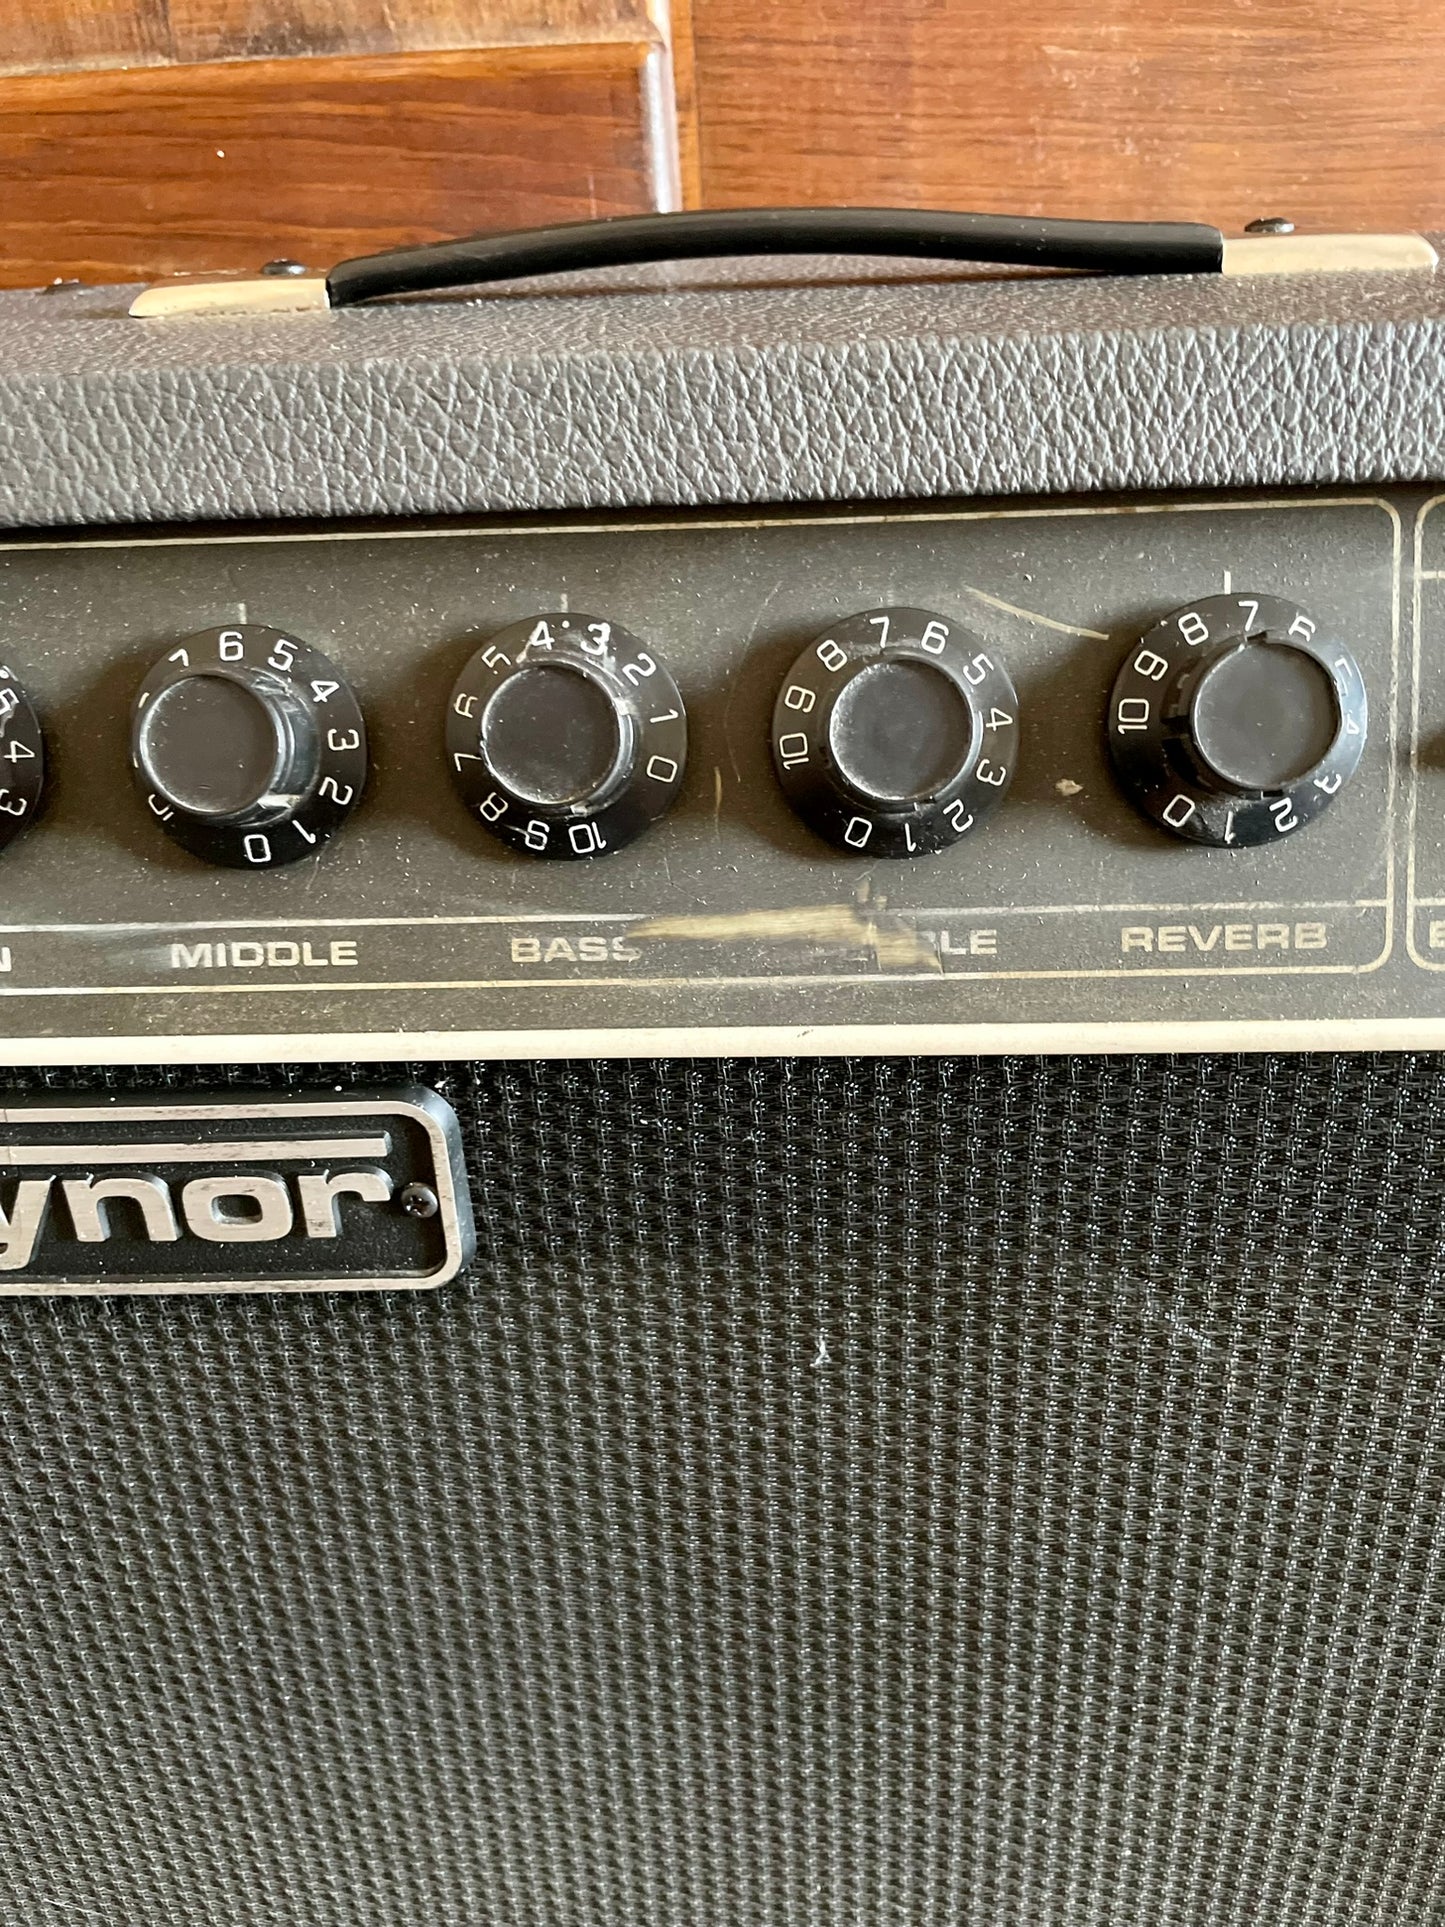 Vintage 1970s Traynor TS-50 - Solid state (1976-1979)